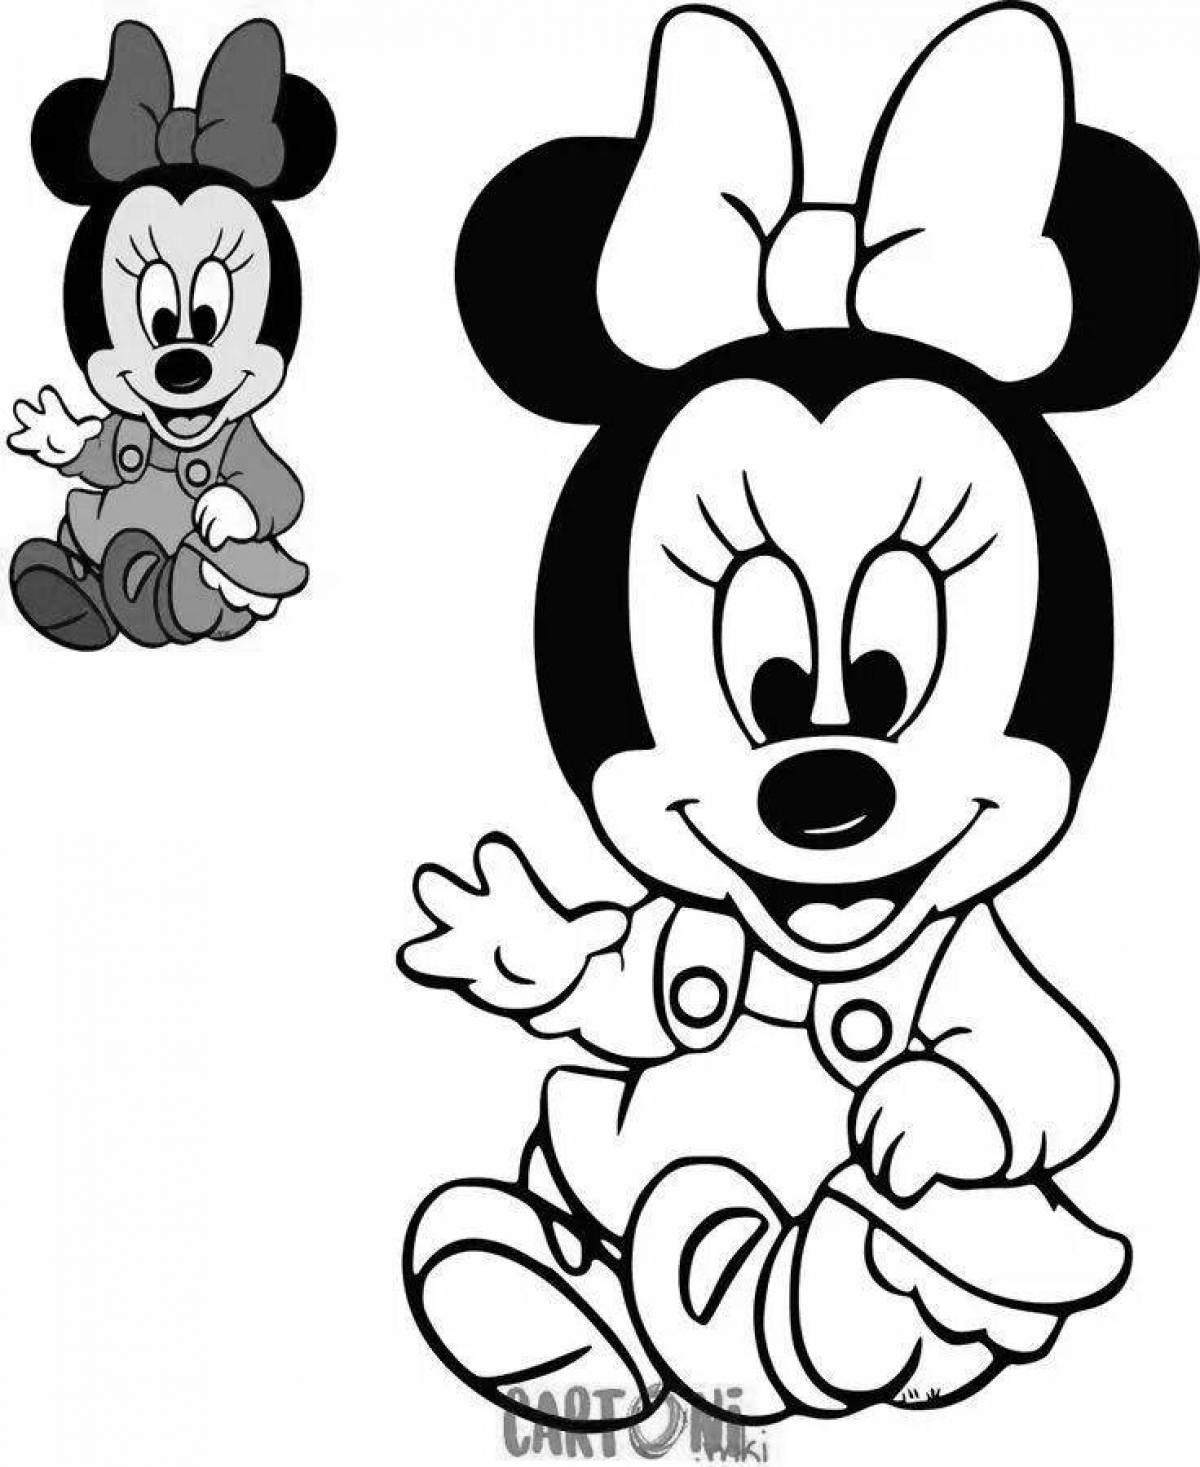 Minnie mouse holiday coloring book